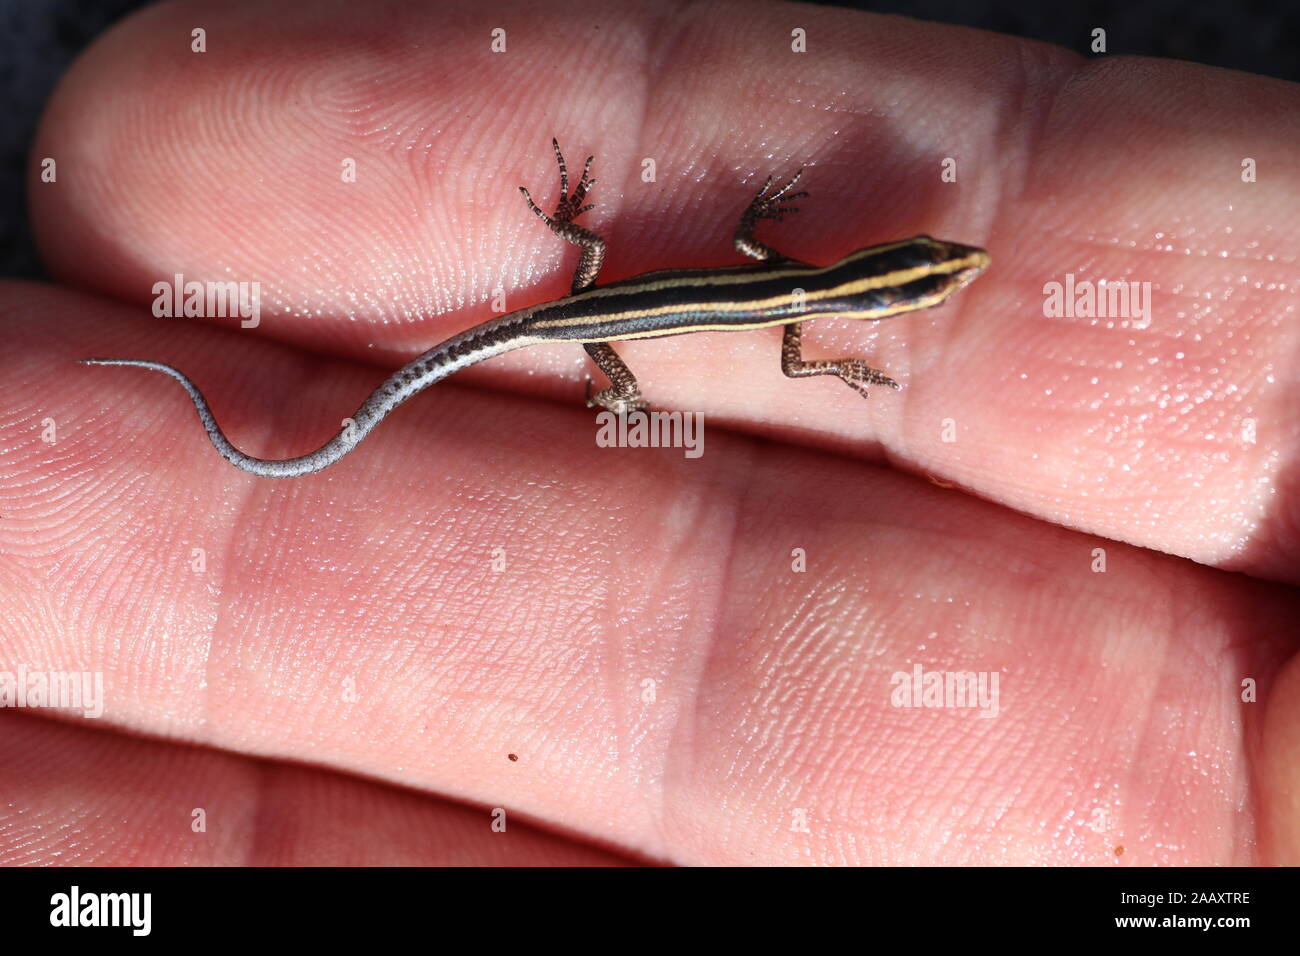 A Small lizard with a black body and yellow stripes Cryptoblepharus  egeriae. Bright blue tail. Small skink climbs on fingers of human hand  Stock Photo - Alamy